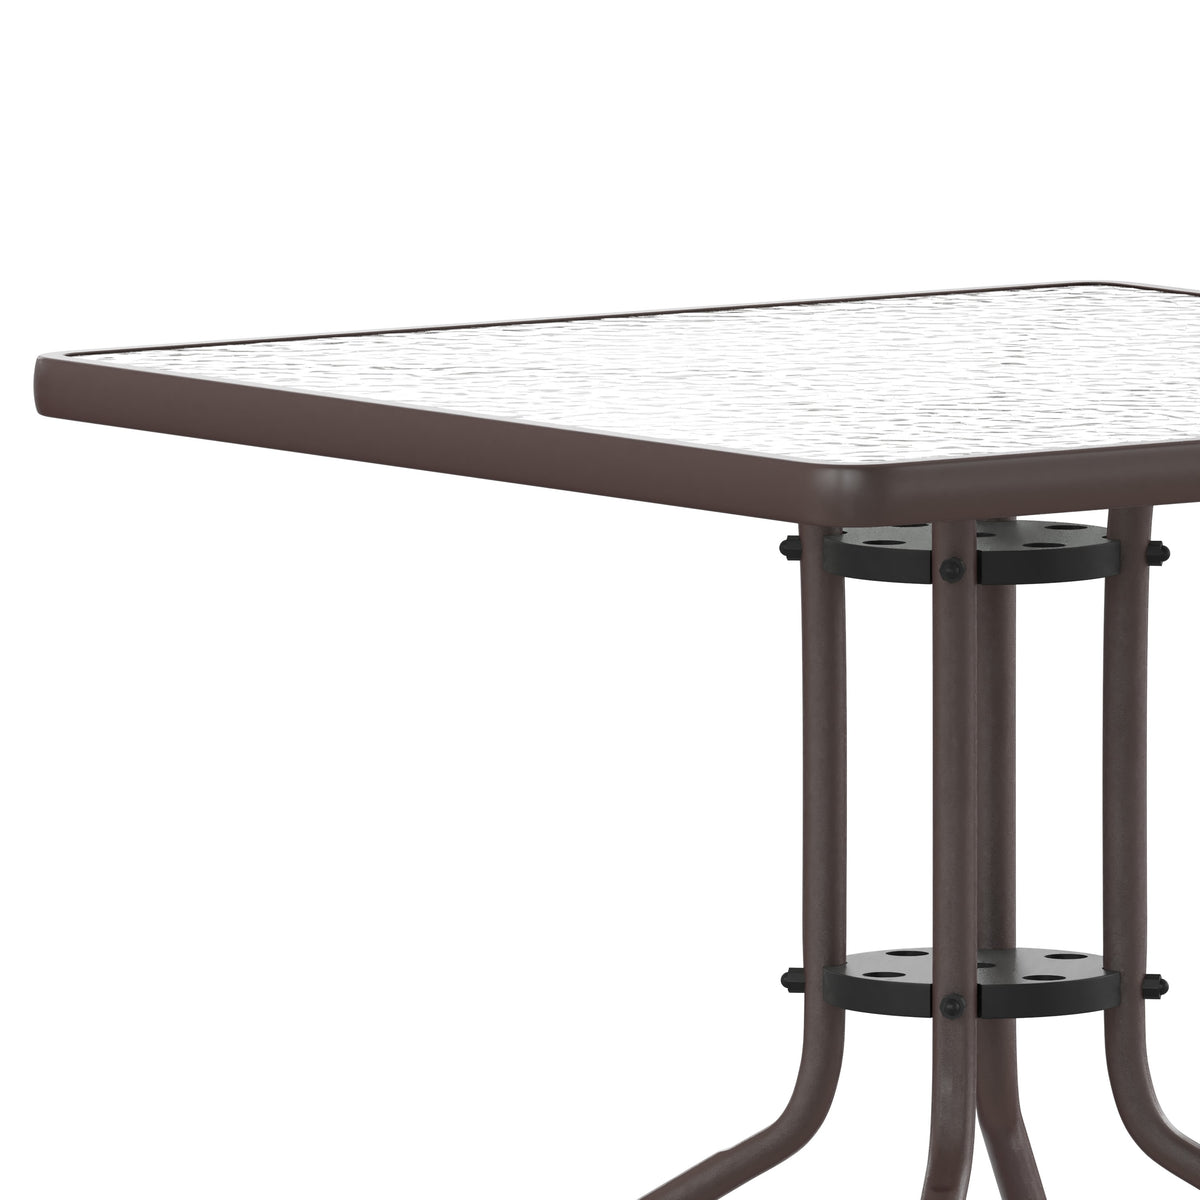 Clear/Bronze |#| 31.5inch Square Tempered Glass Metal Table with Smooth Ripple Design Top